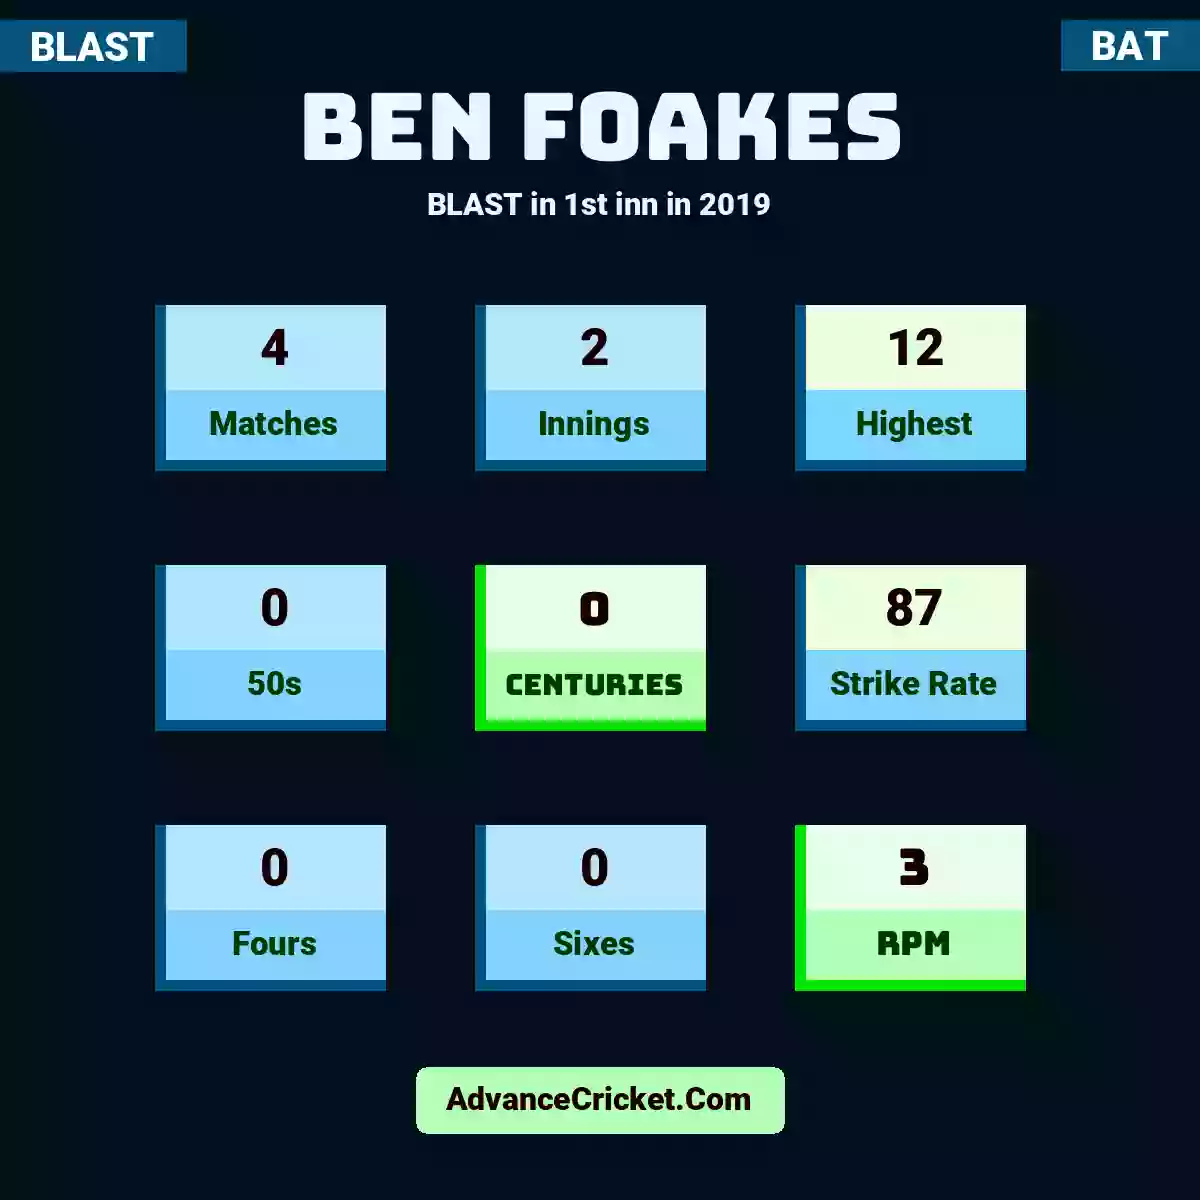 Ben Foakes BLAST  in 1st inn in 2019, Ben Foakes played 4 matches, scored 12 runs as highest, 0 half-centuries, and 0 centuries, with a strike rate of 87. B.Foakes hit 0 fours and 0 sixes, with an RPM of 3.